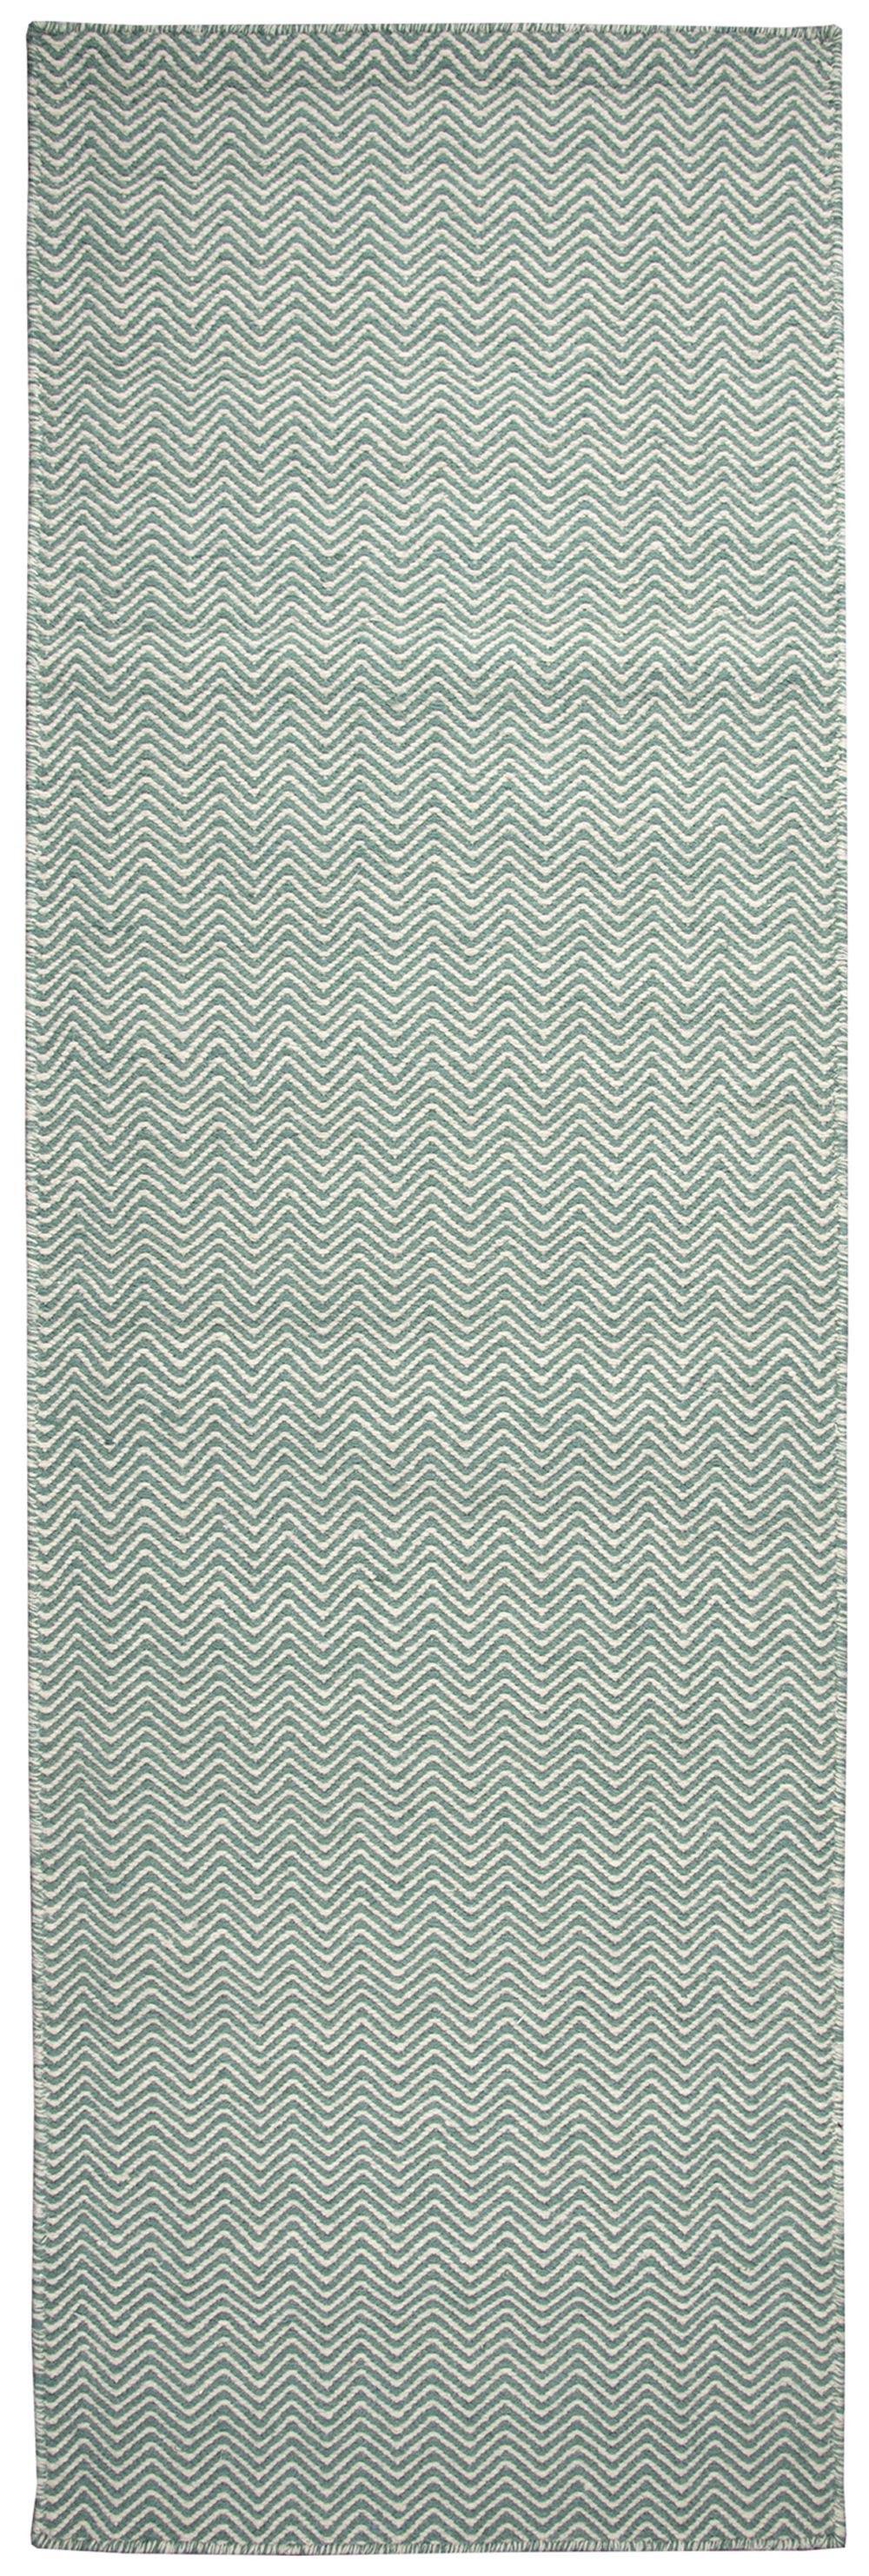 Rizzy Home Twist TW2927 green Rug